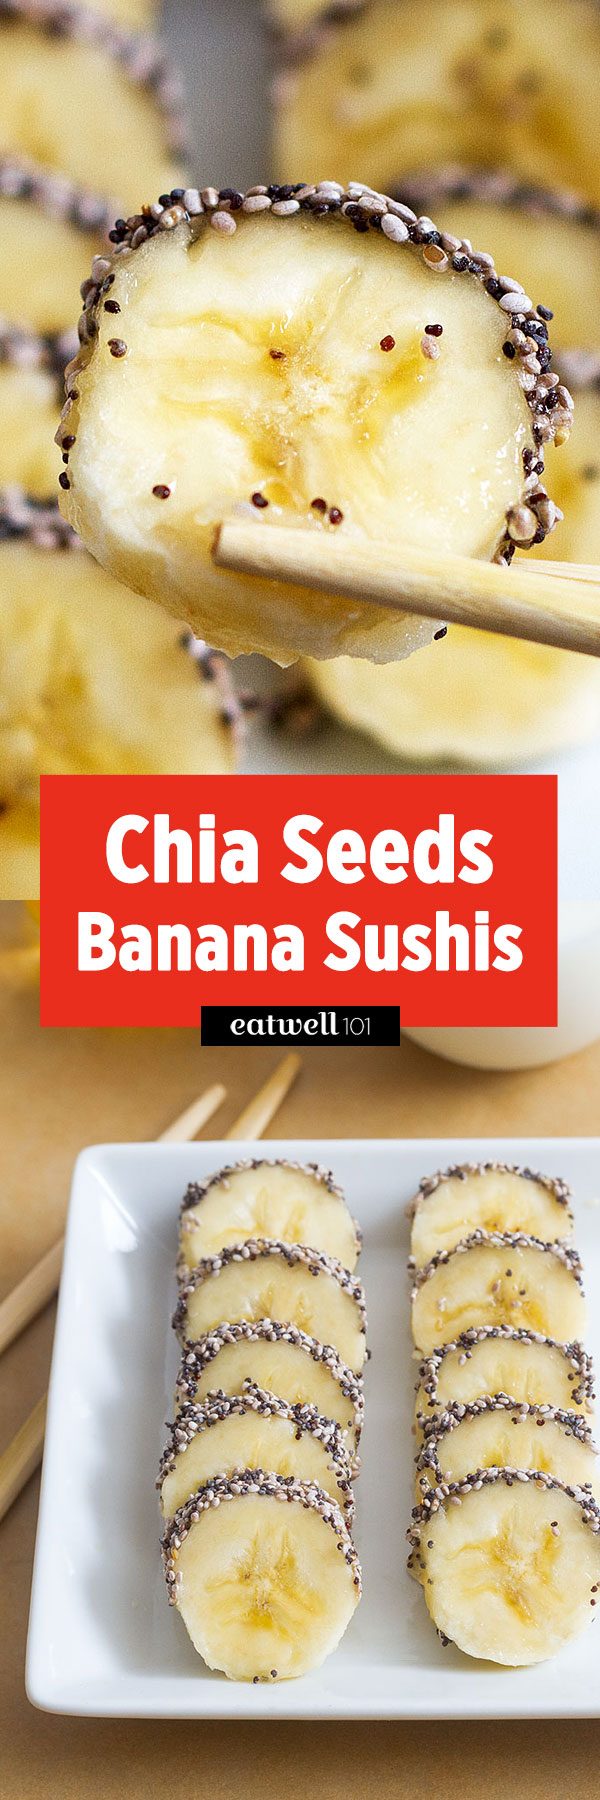 Banana Chia Seeds Sushis Recipe - #banana #sushi #recipe #eatwell101 - These Banana Chia Seeds Sushis are the perfect way to start your day with creative and healthy fun food!